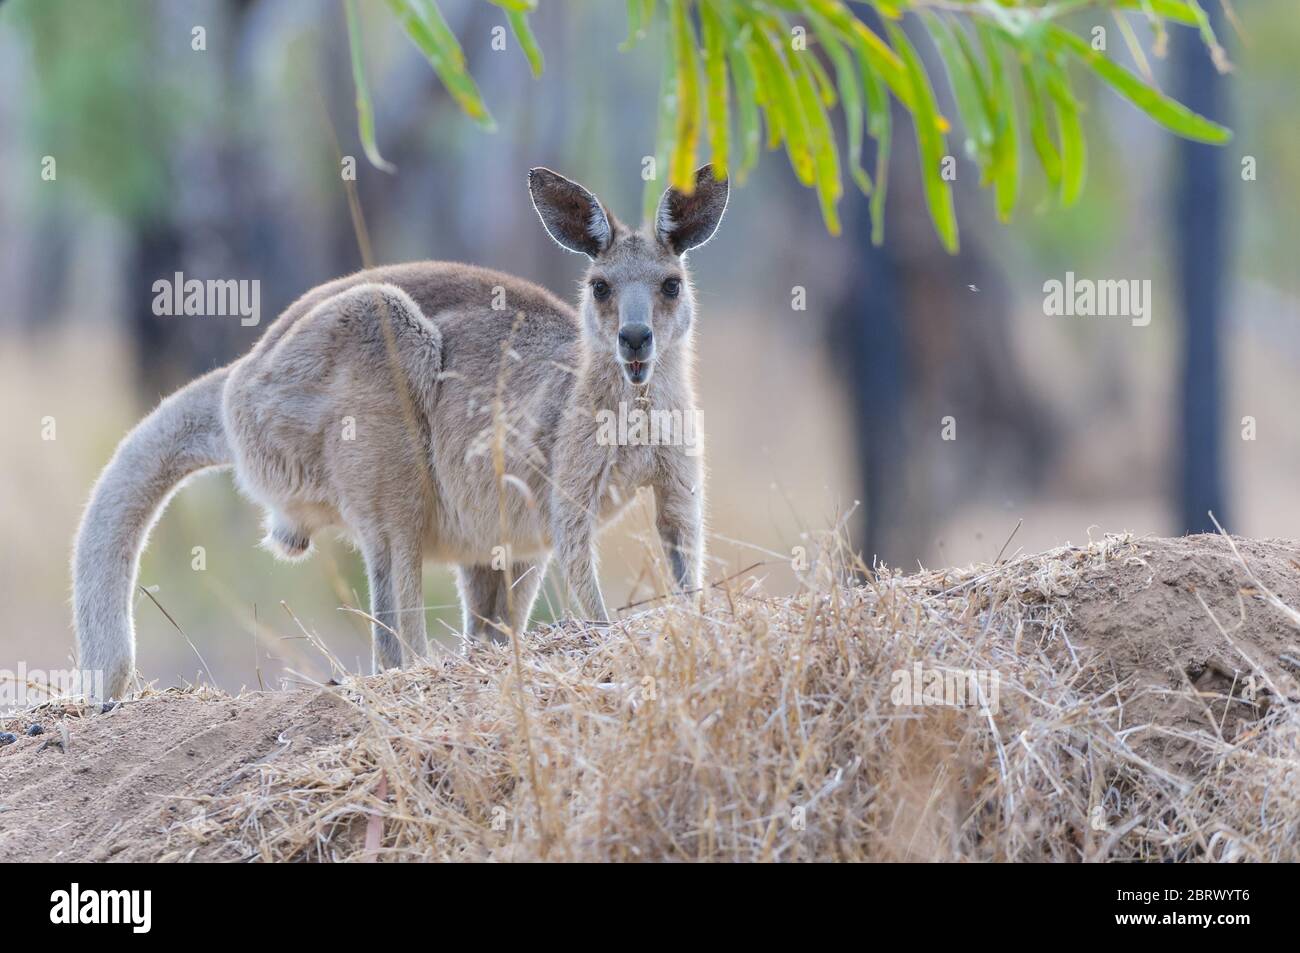 A young female Eastern grey kangaroo at Undarra, outback Australia crouches atop a grassy hillock in the open savannah woodland framed by gum leaves. Stock Photo